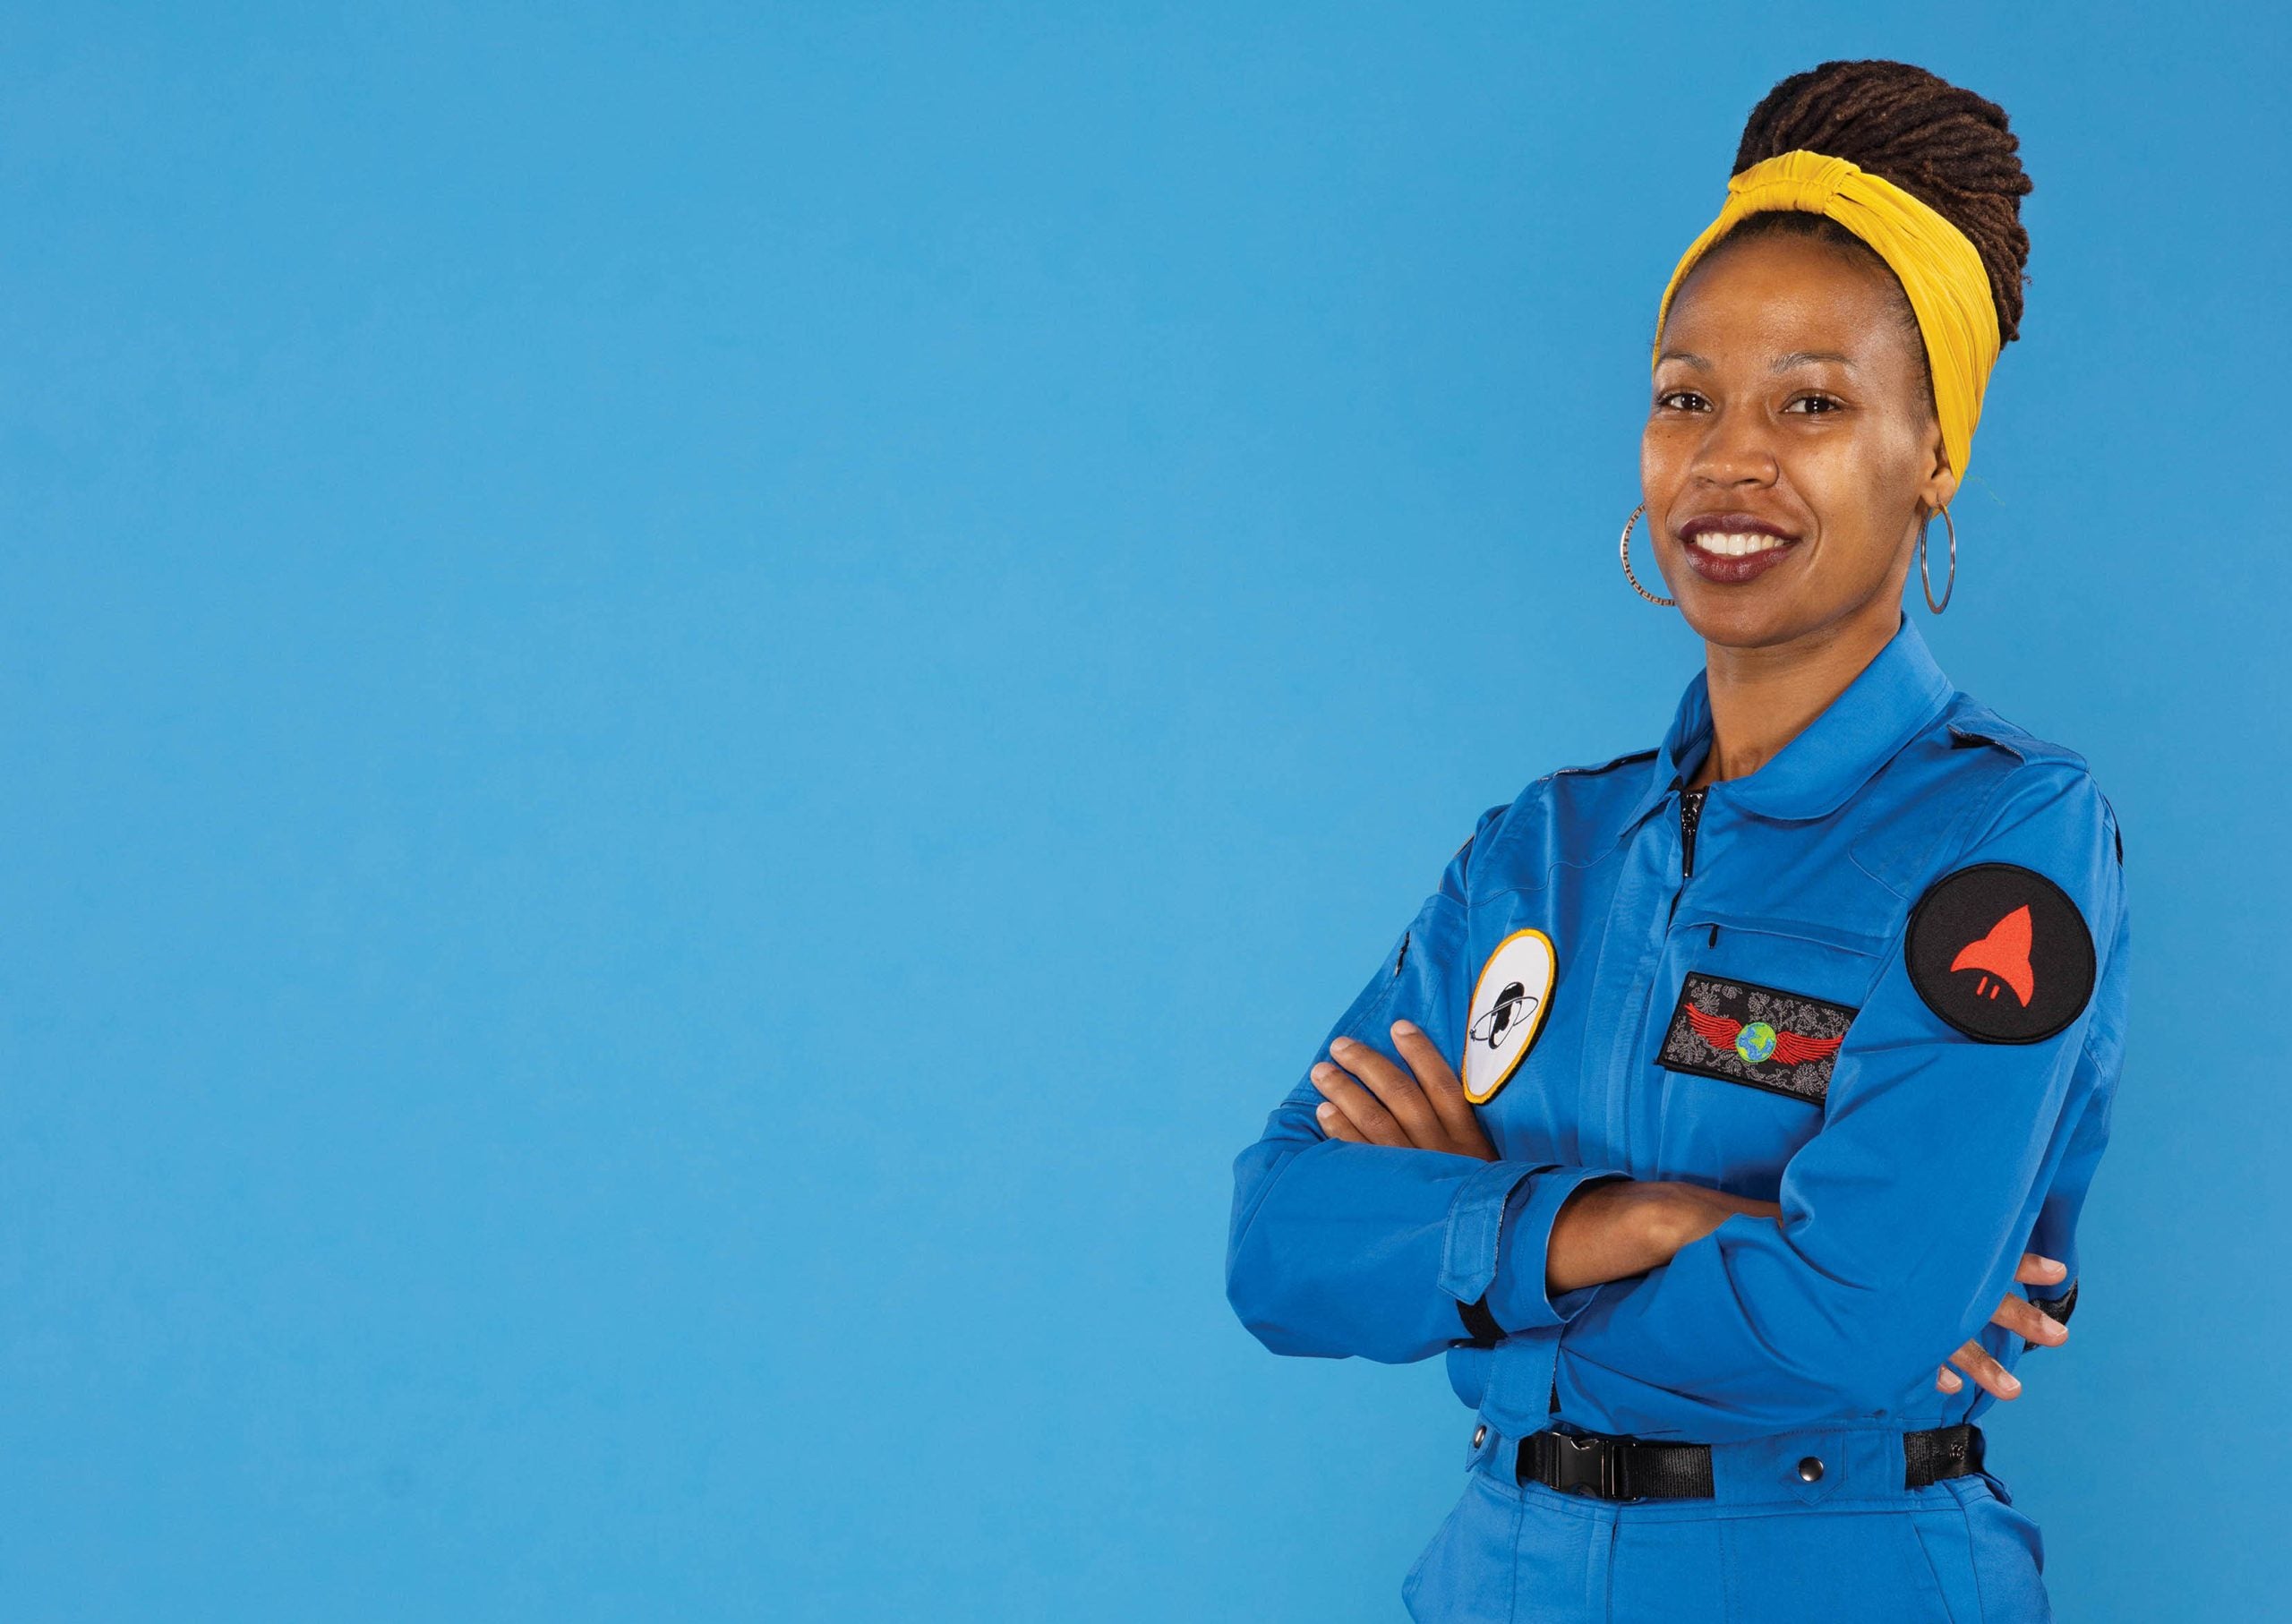 A Black Woman Is Designing For Future Female Astronauts —Here's Her Story